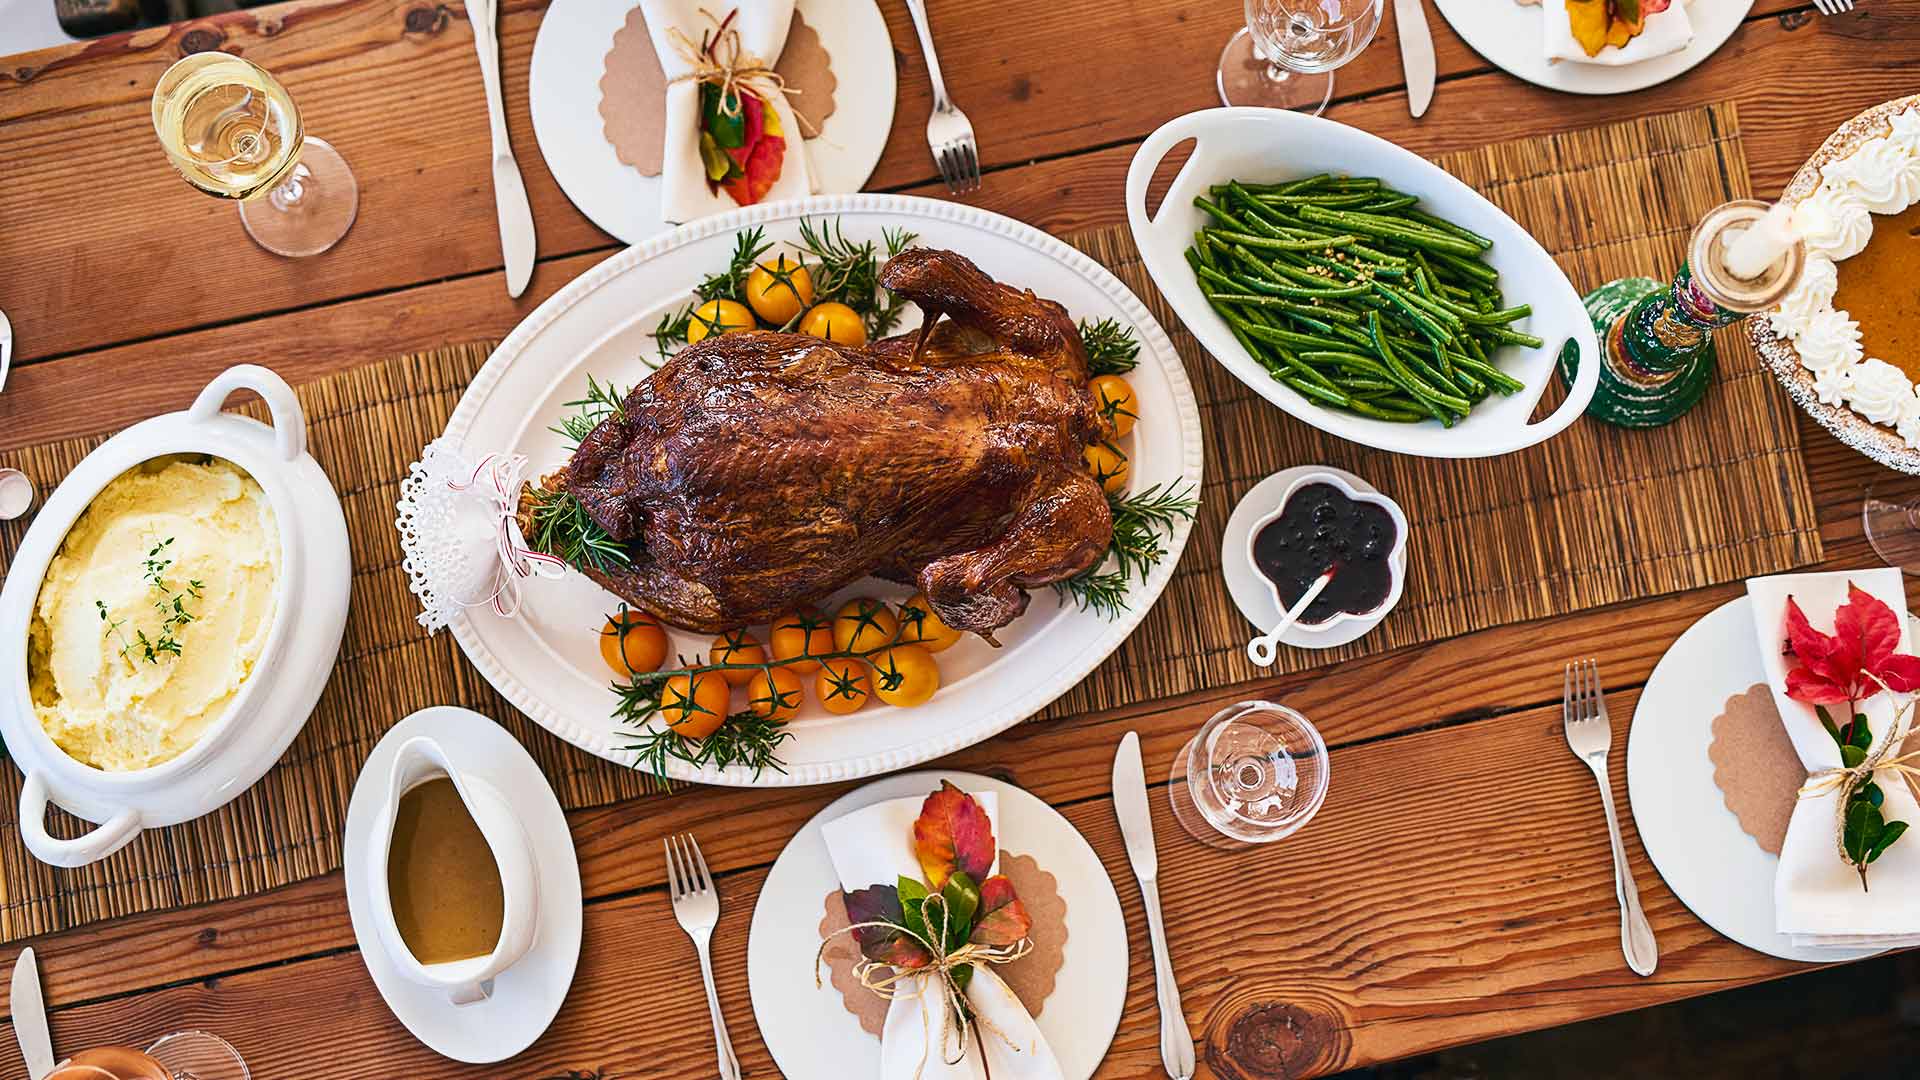 Turkey Dinner on the Lawn? Creative Ways to Celebrate the Holidays in 2020